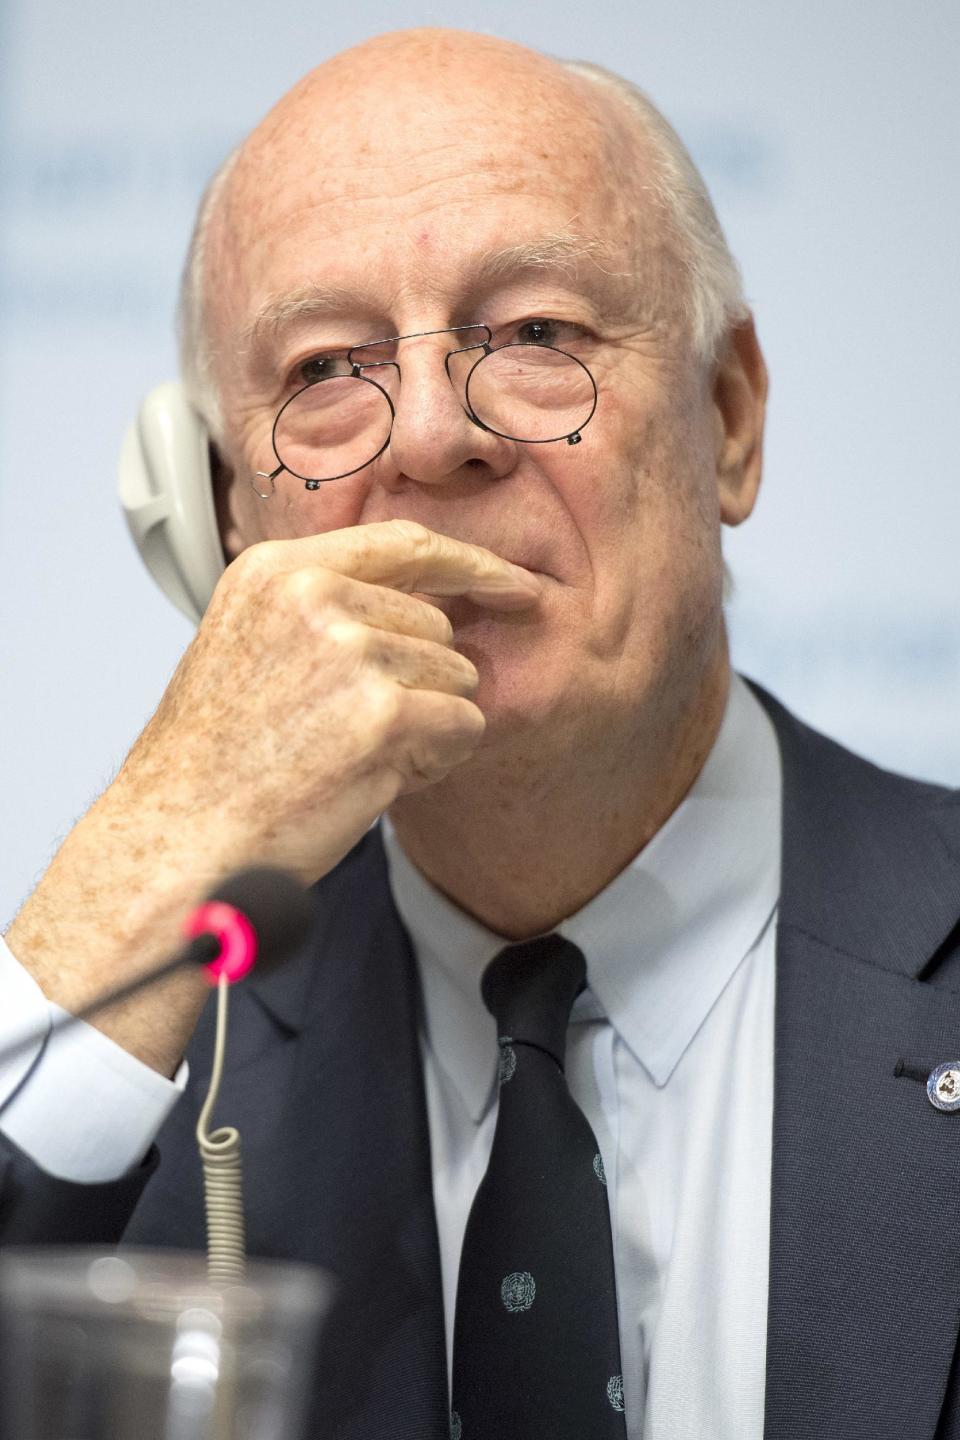 UN Special Envoy of the Secretary-General for Syria Staffan de Mistura informs the media one day before the resumption of the negotiation between the Syrian government and the opposition, at the European headquarters of the United Nations in Geneva, Switzerland, on Wednesday, Feb. 22, 2017. (Martial Trezzini/Keystone via AP)